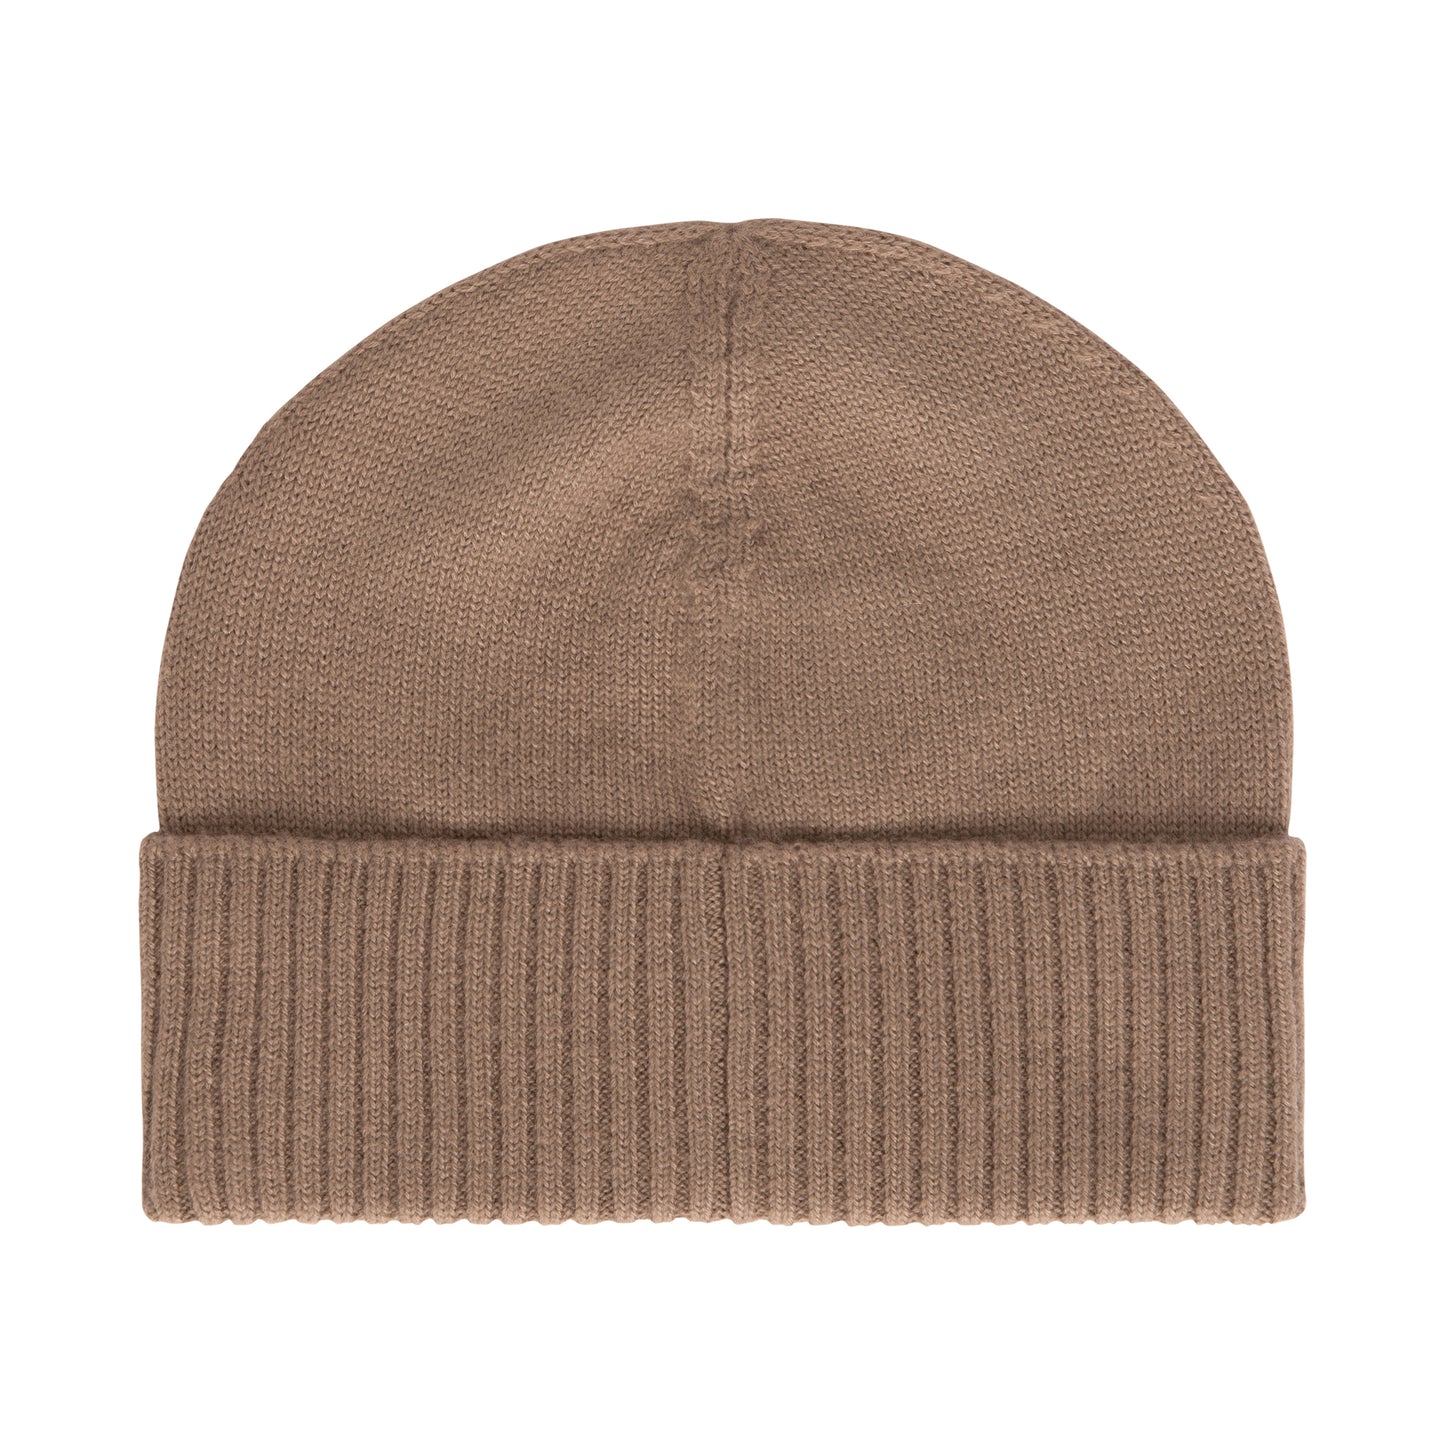 Rick Owens x Moncler Ribbed Beanie in Dust